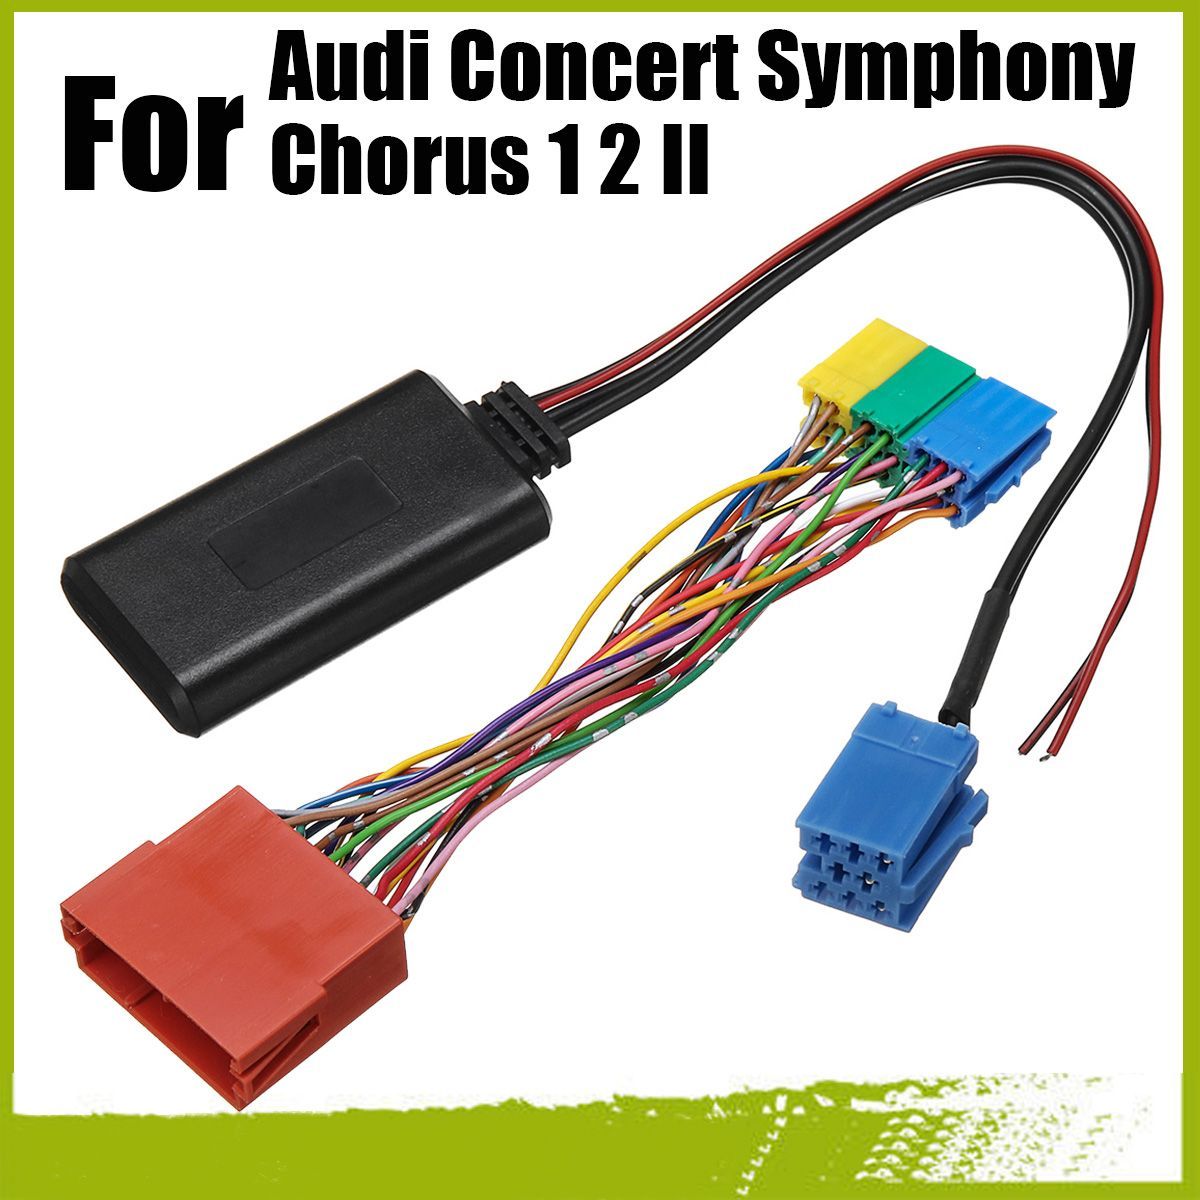 bluetooth-Adapter-MP3-AUX-In-Music-CD-for-Audi-Concert-Symphony-Chorus-1-2-II-1485159